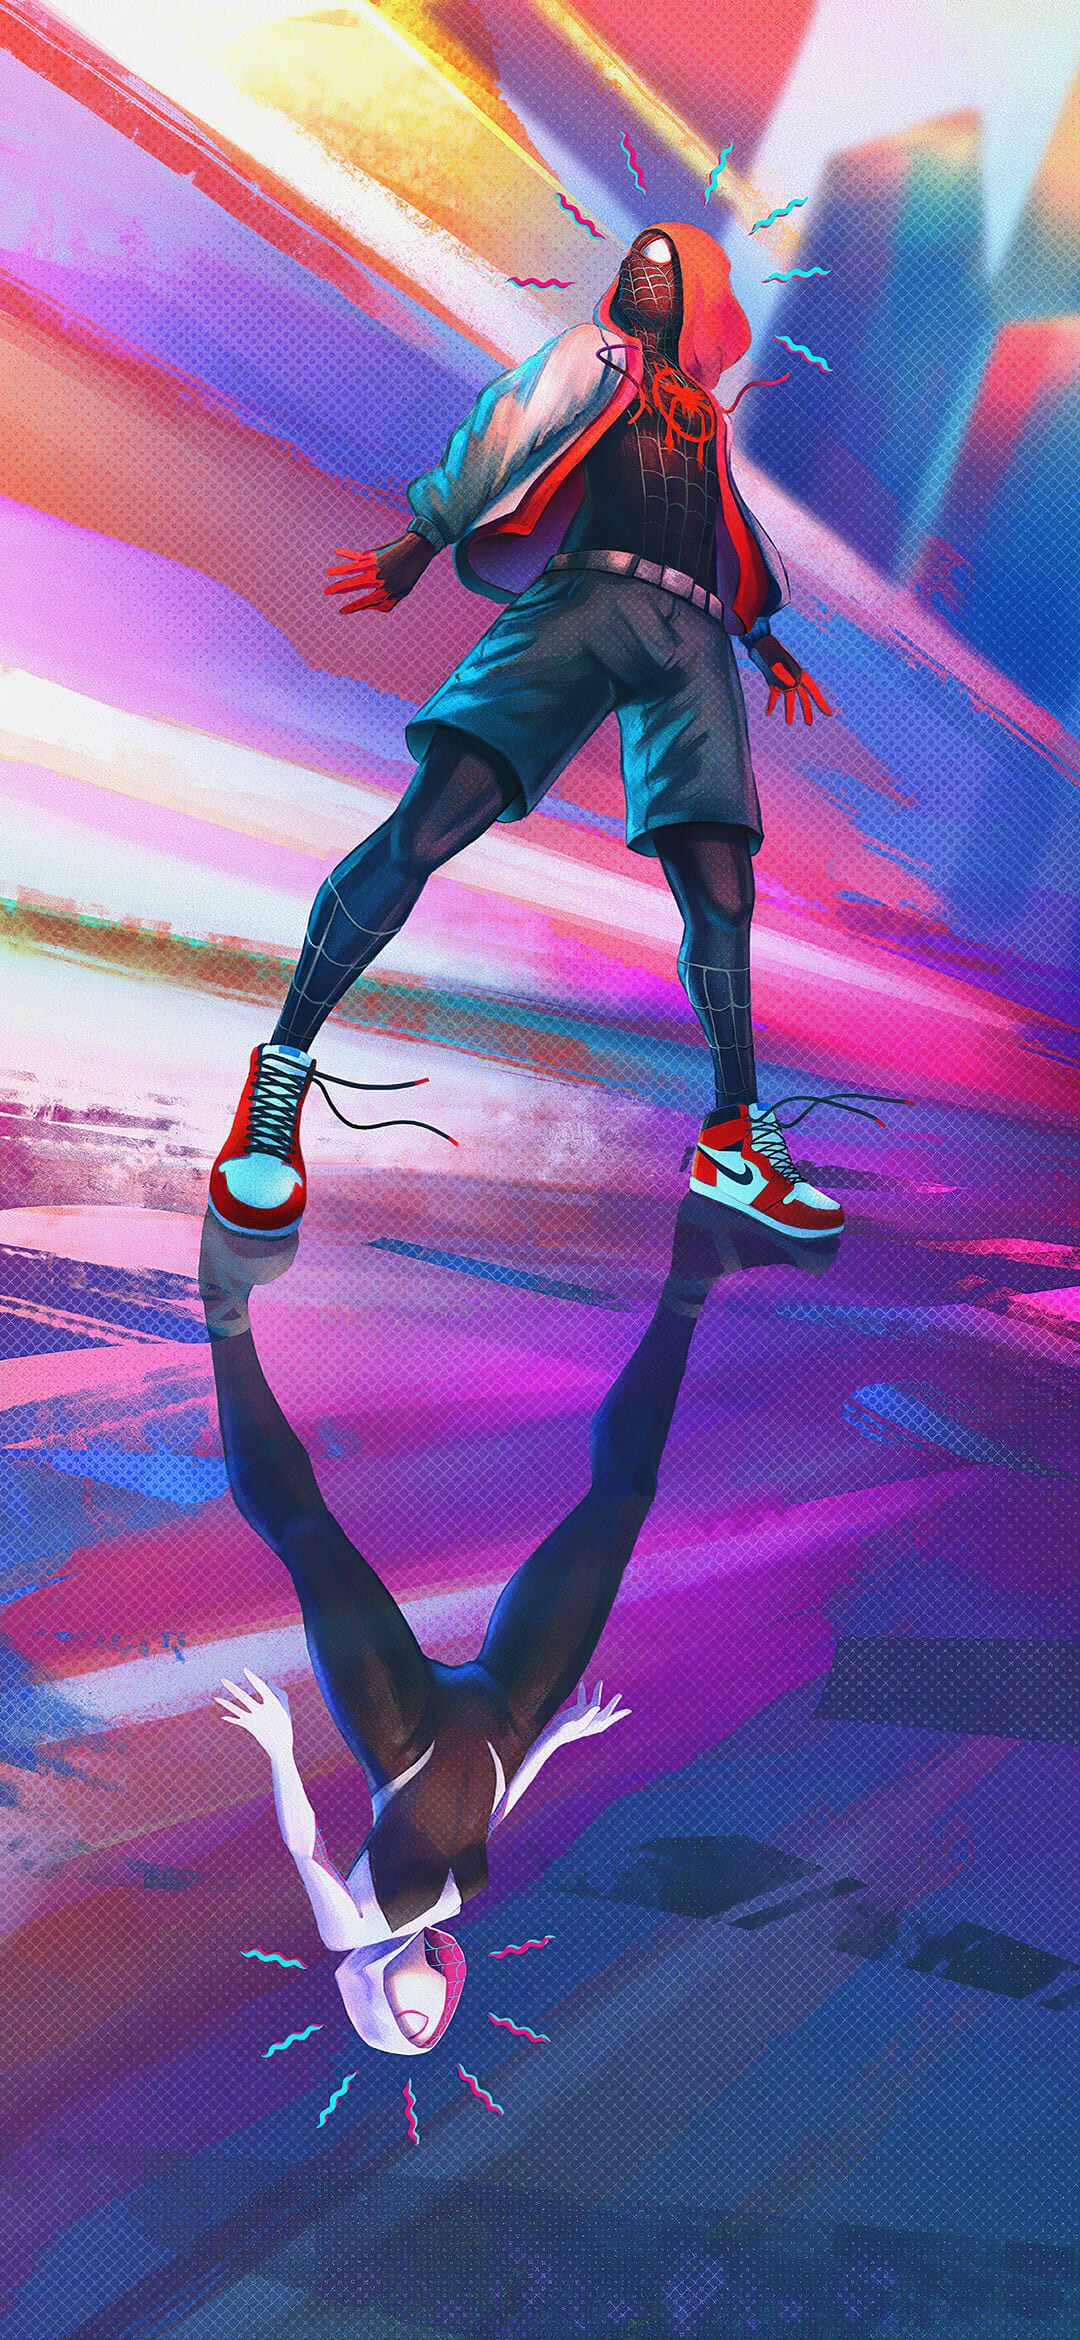 Spider-Man: Into the Spider-Verse: Shameik Moore as Miles Morales and Hailee Steinfeld as Gwen Stacy. 1080x2340 HD Wallpaper.